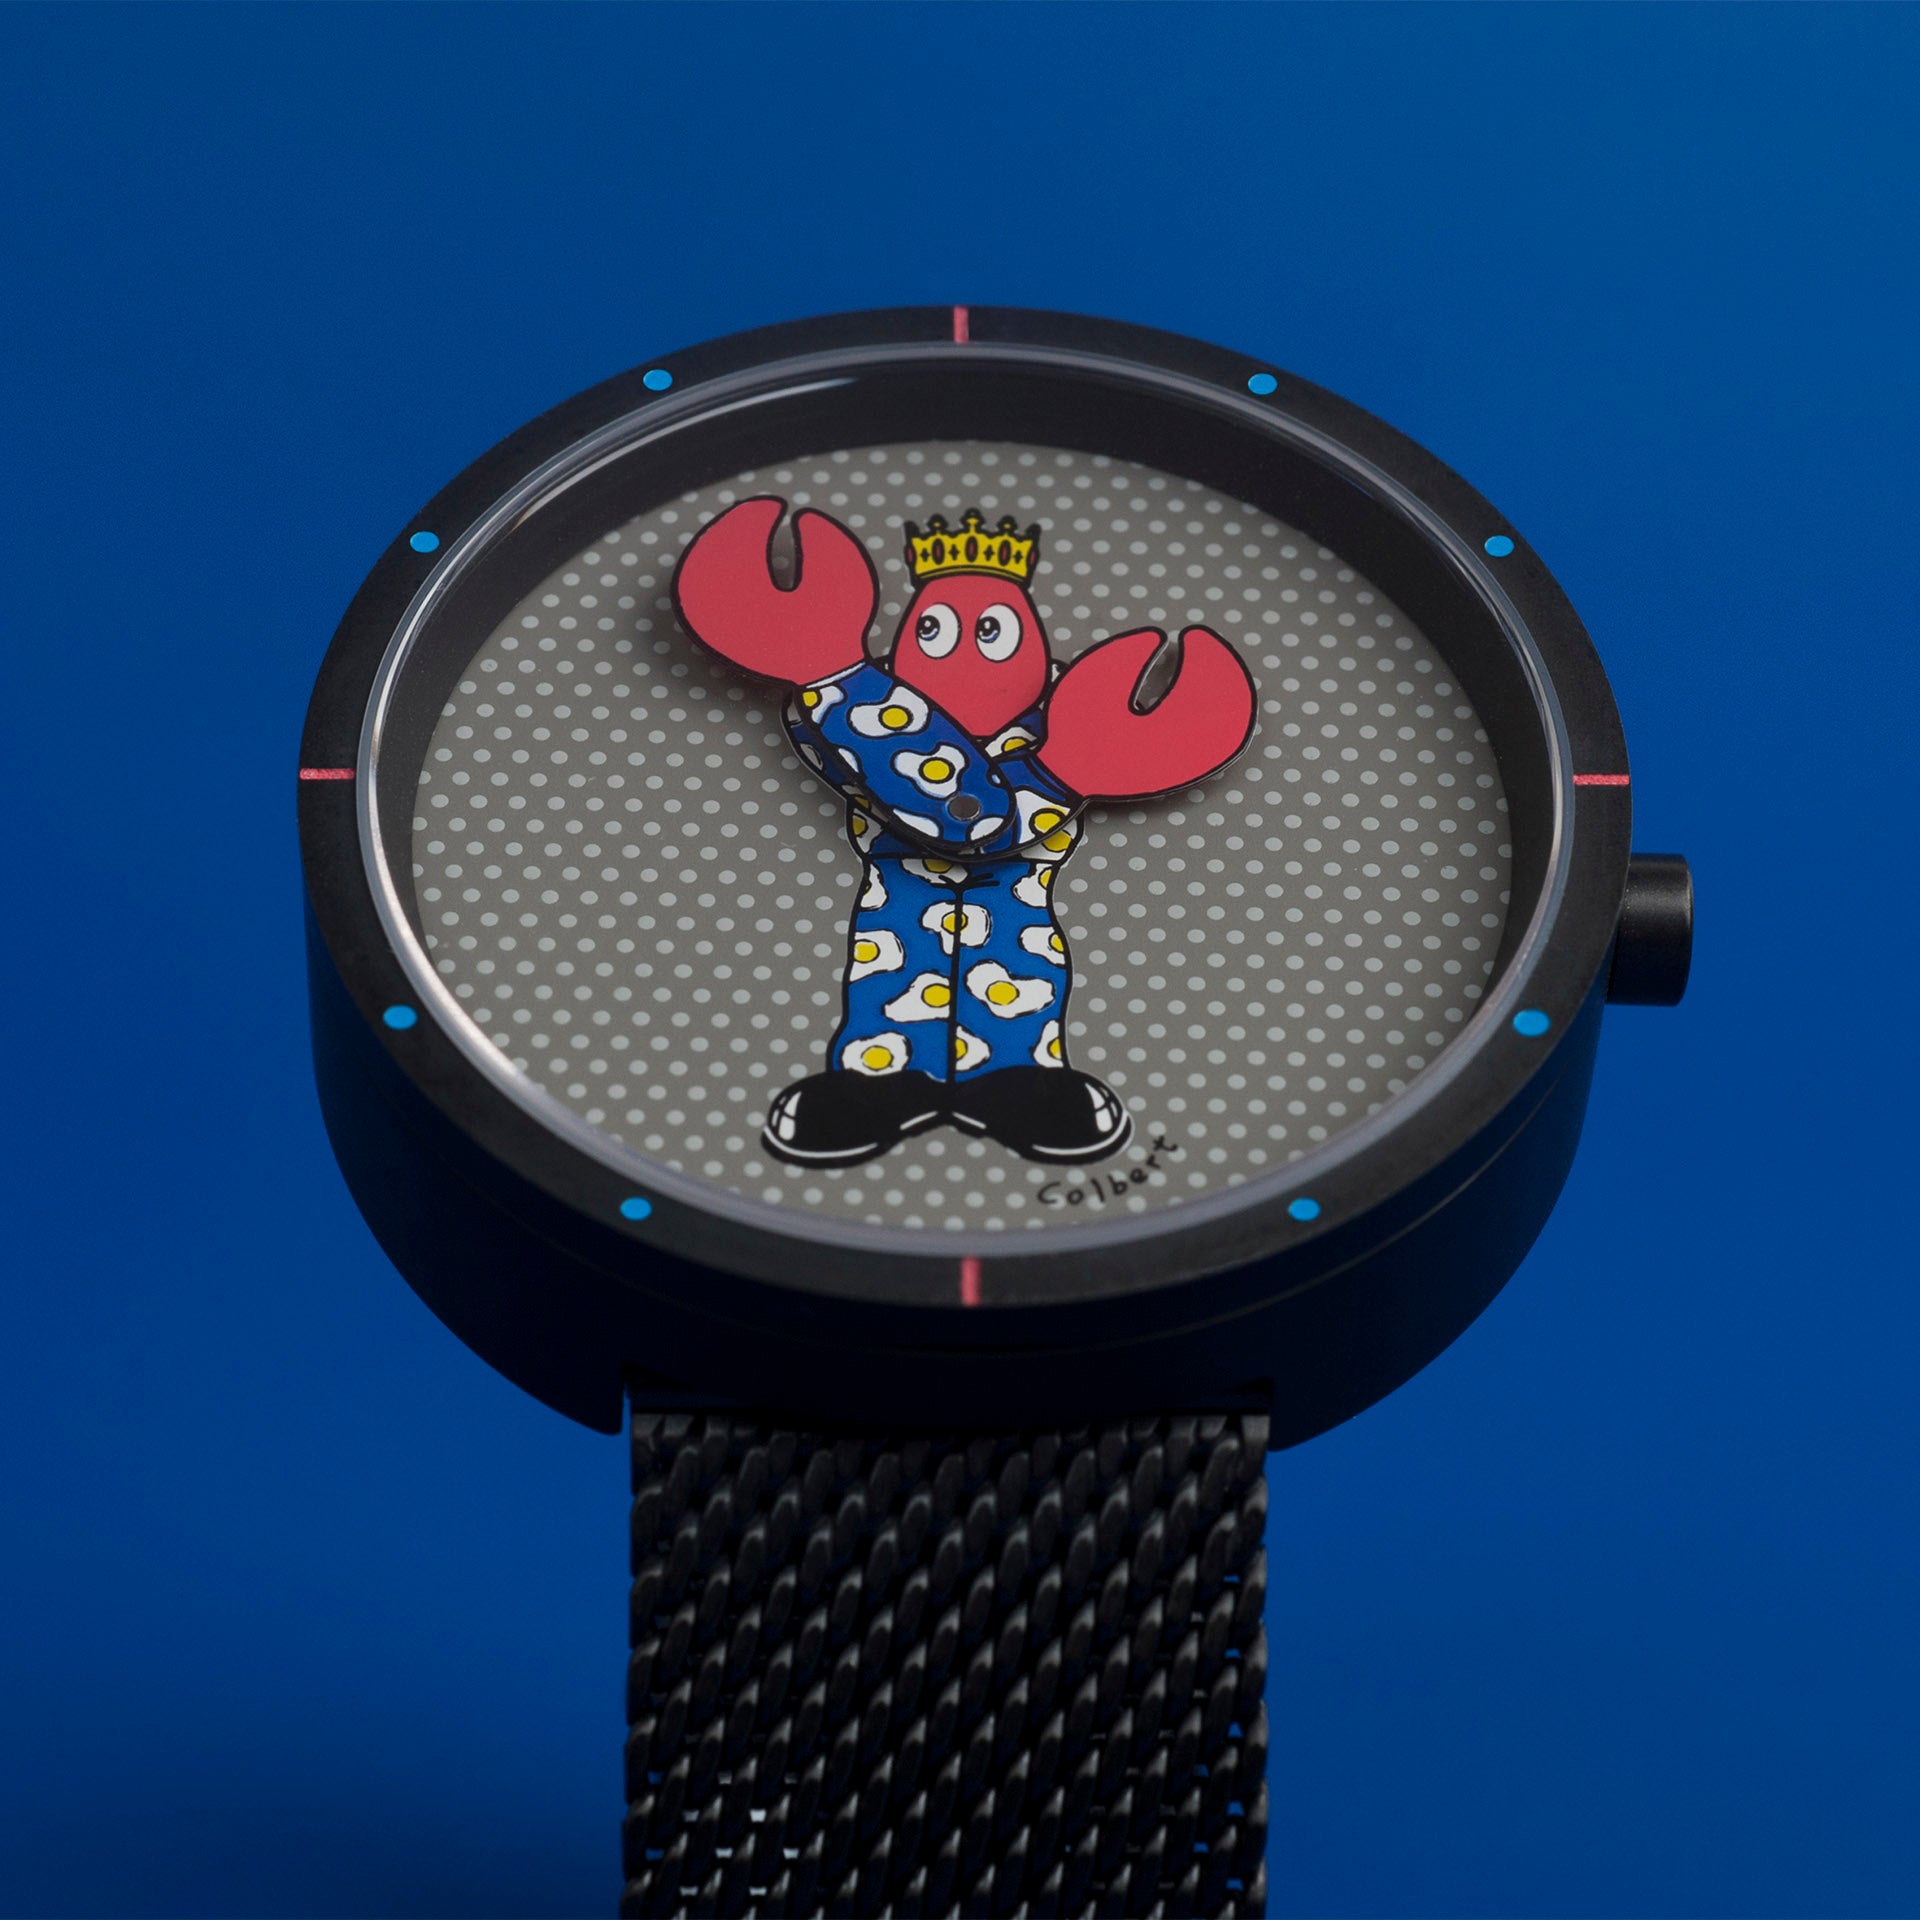 PHILIP COLBERT × ANICORN Automatic Lobster Watches - LIMITED EDITION